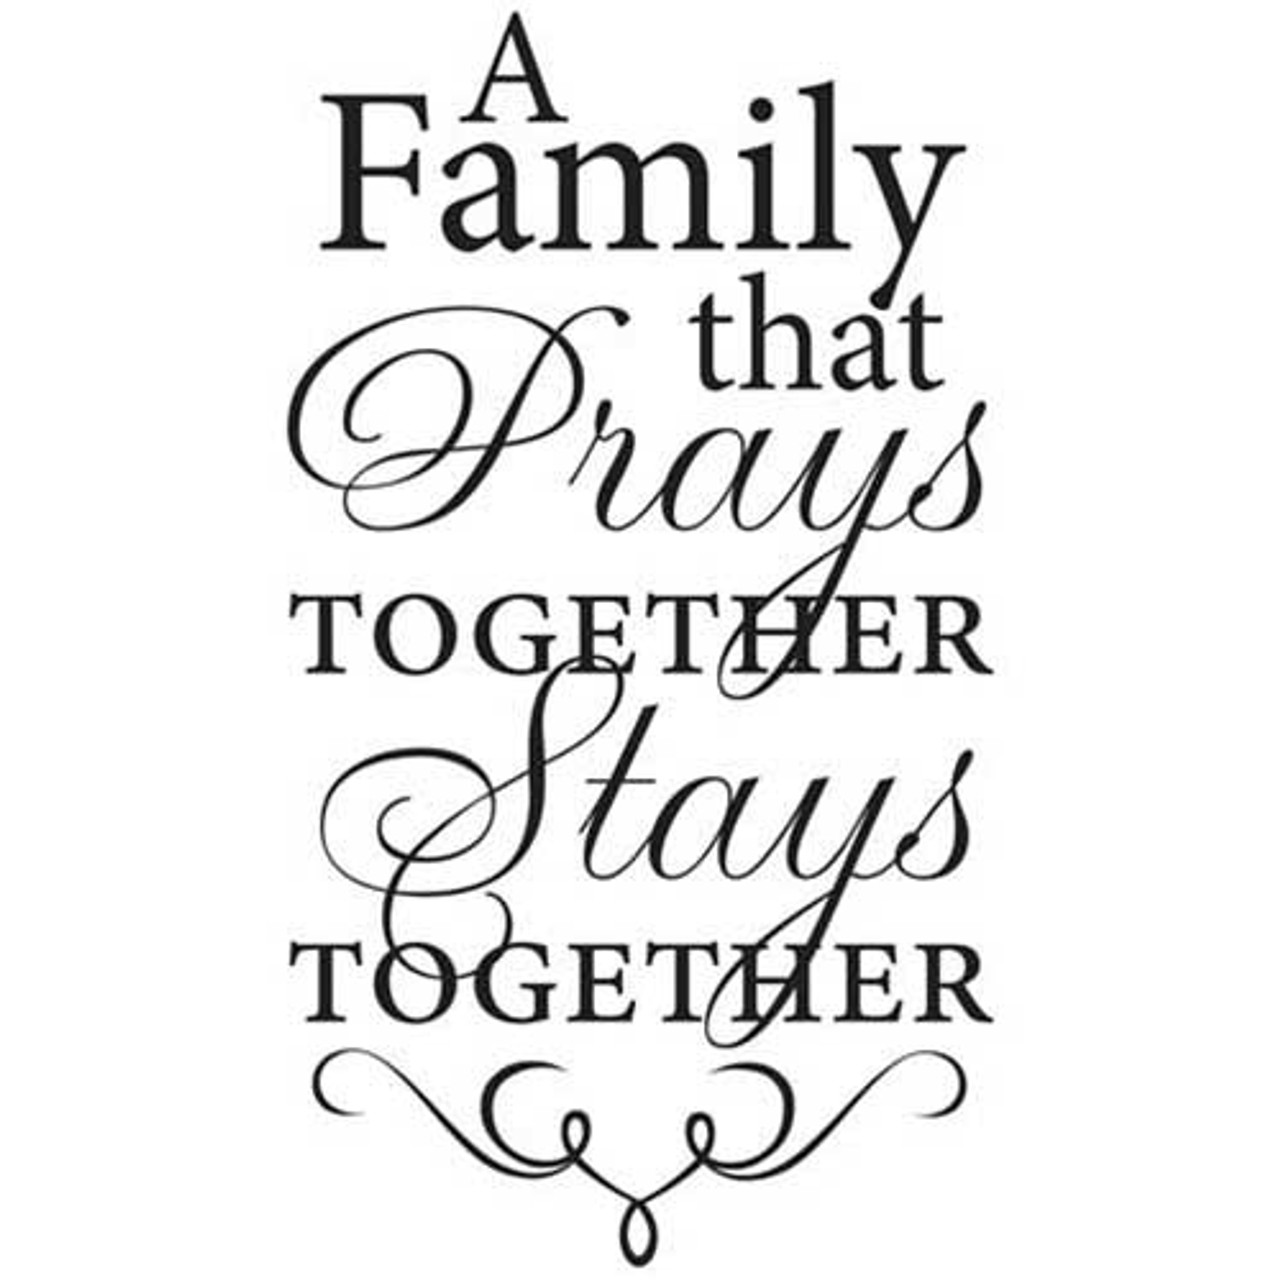 the family that prays together stays together